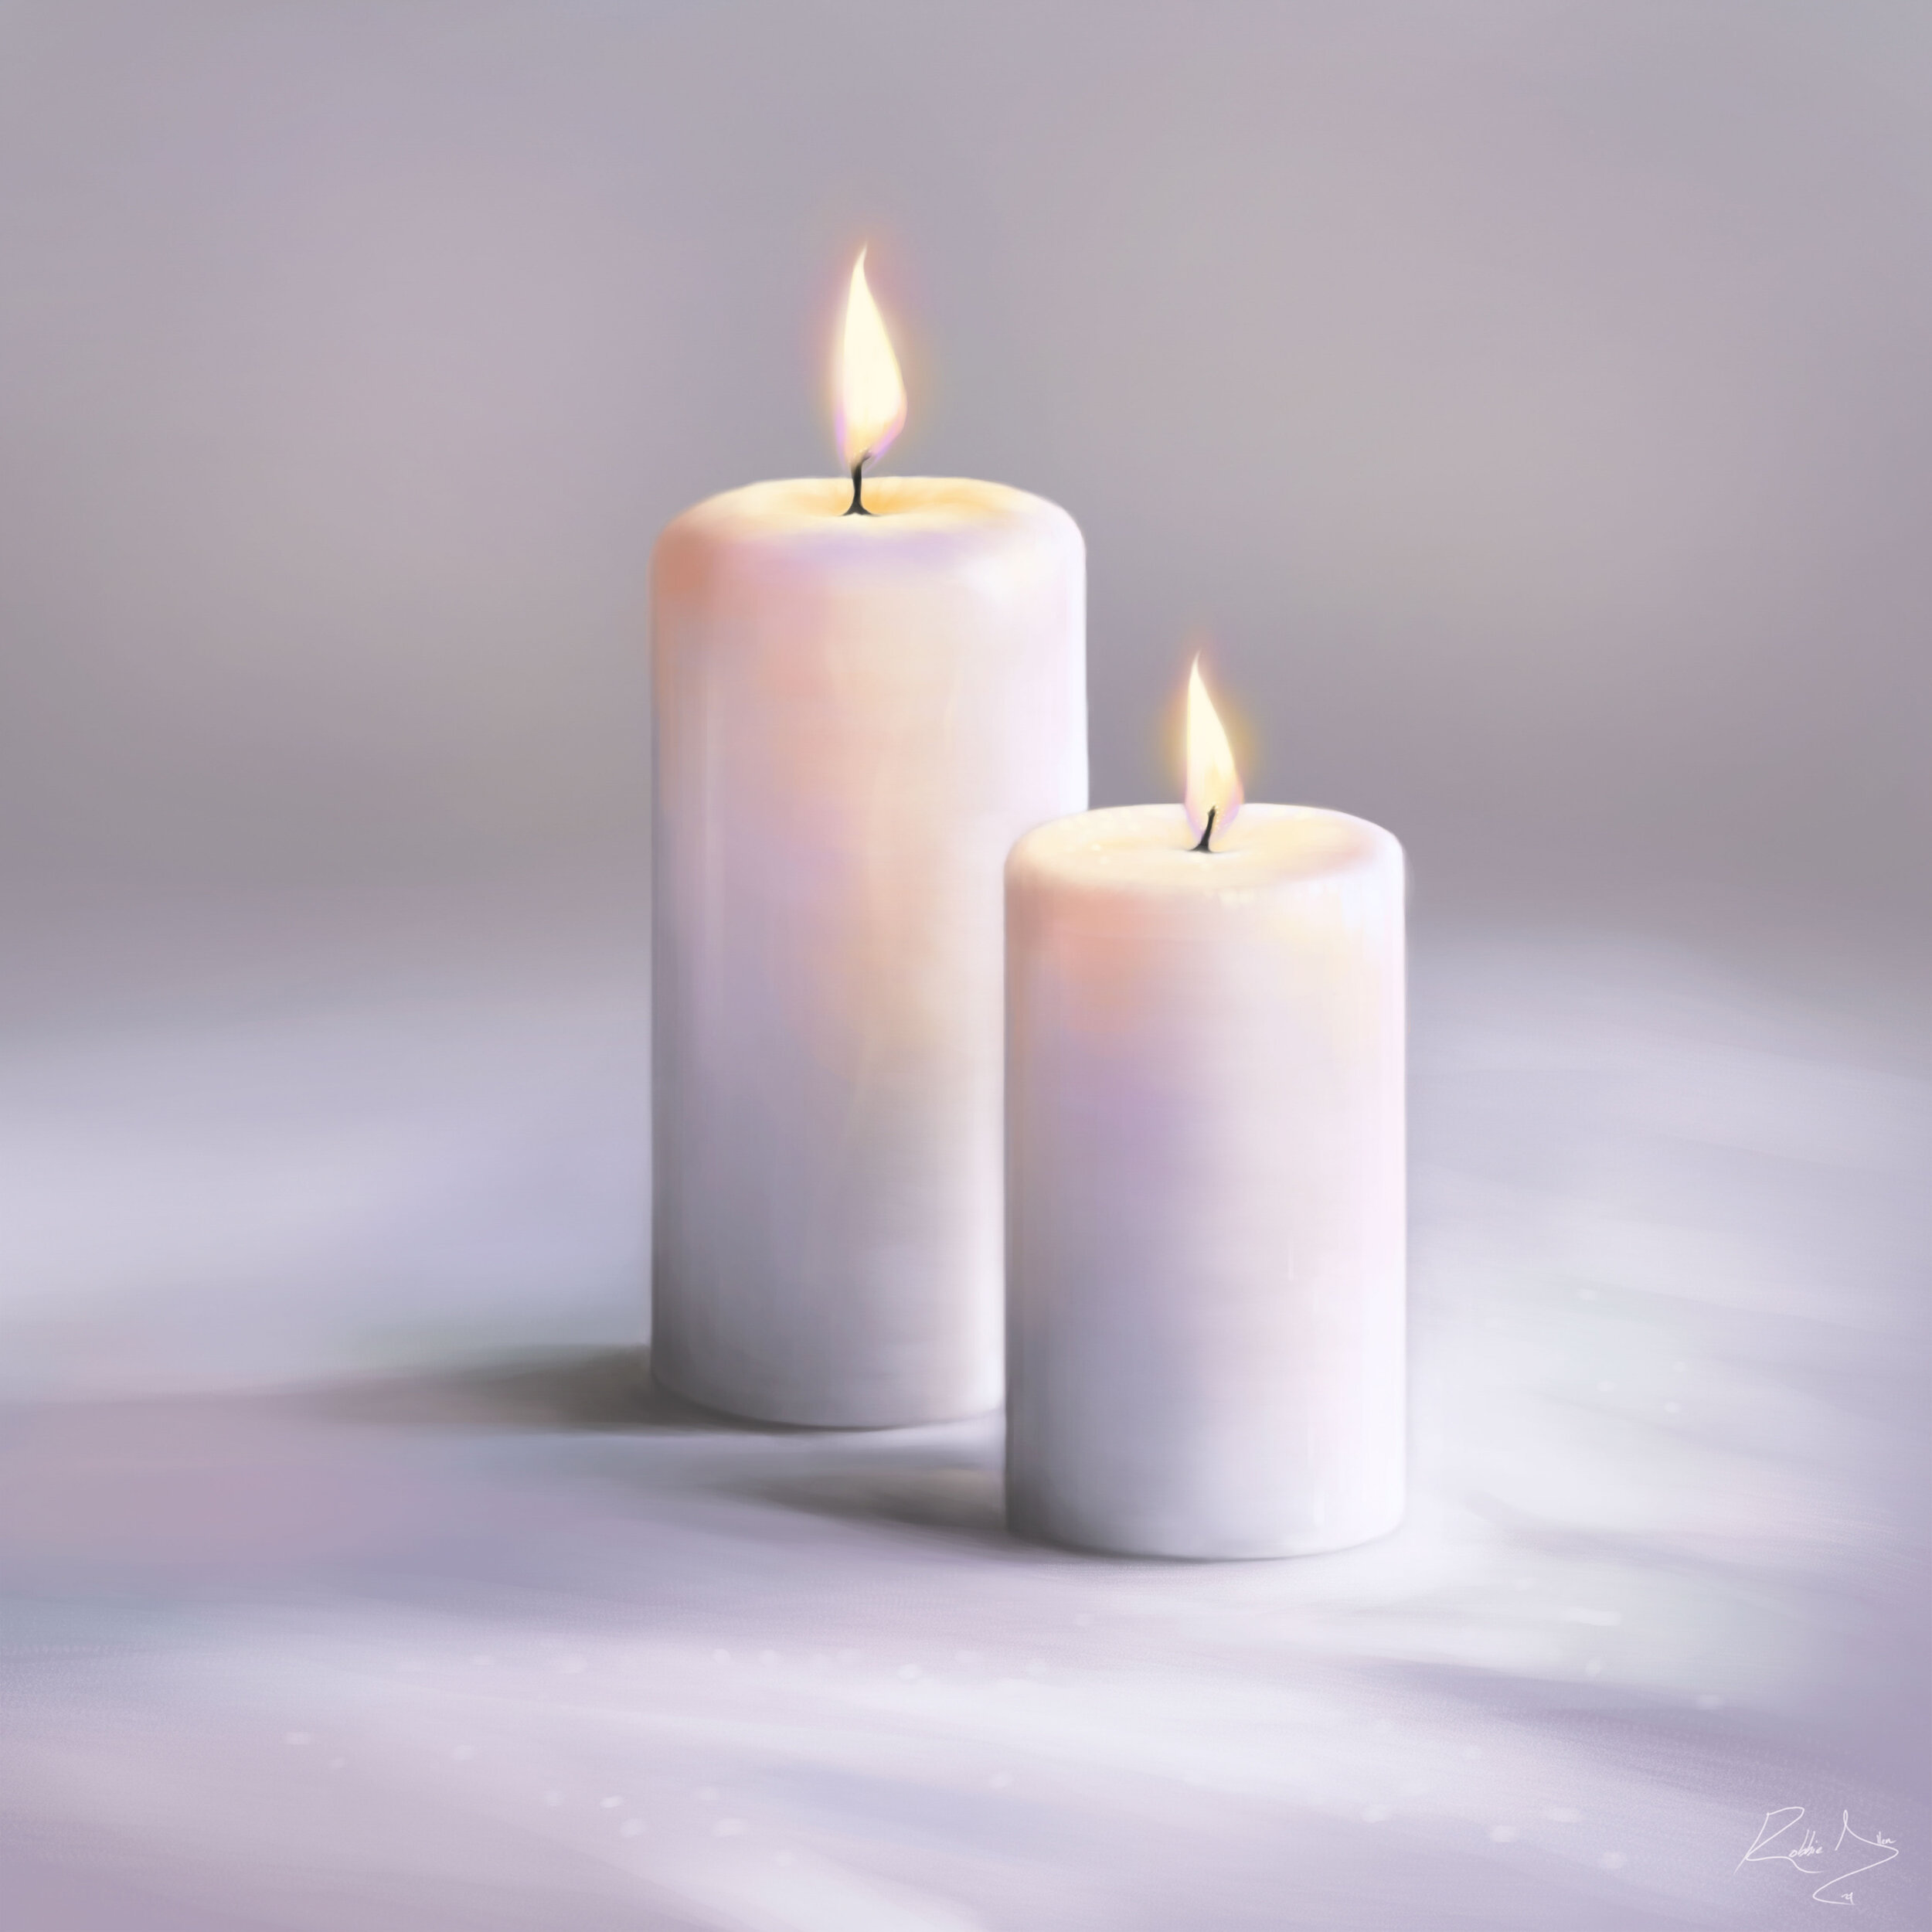 How To Paint Candles In Natural Light (In Photoshop & Procreate